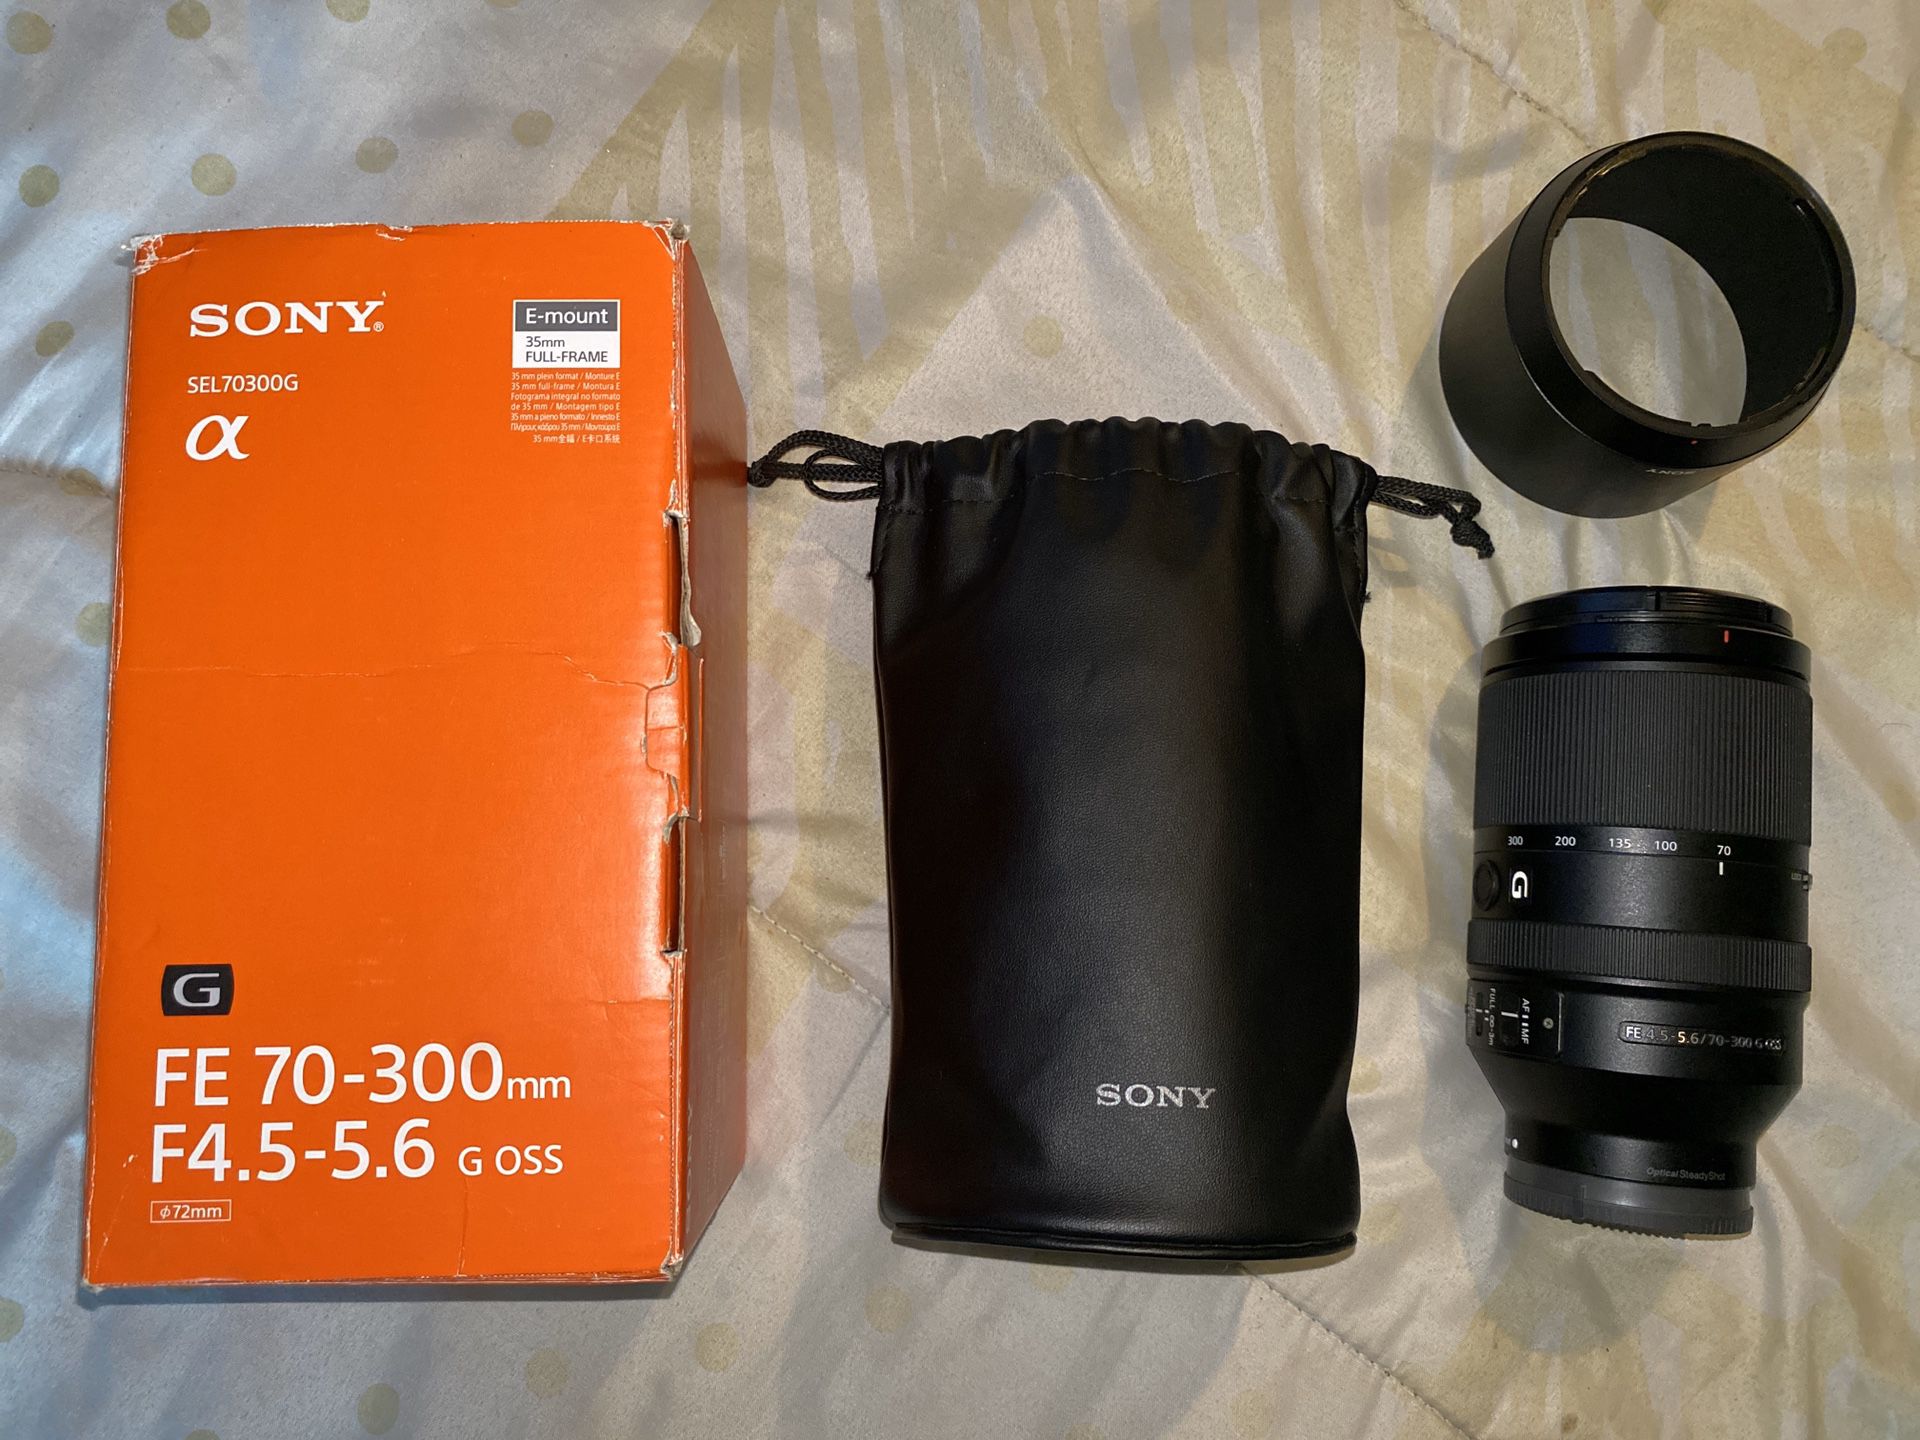 Sony 70-300 F4.5-5.6 G OSS for Sale in Houston, TX - OfferUp